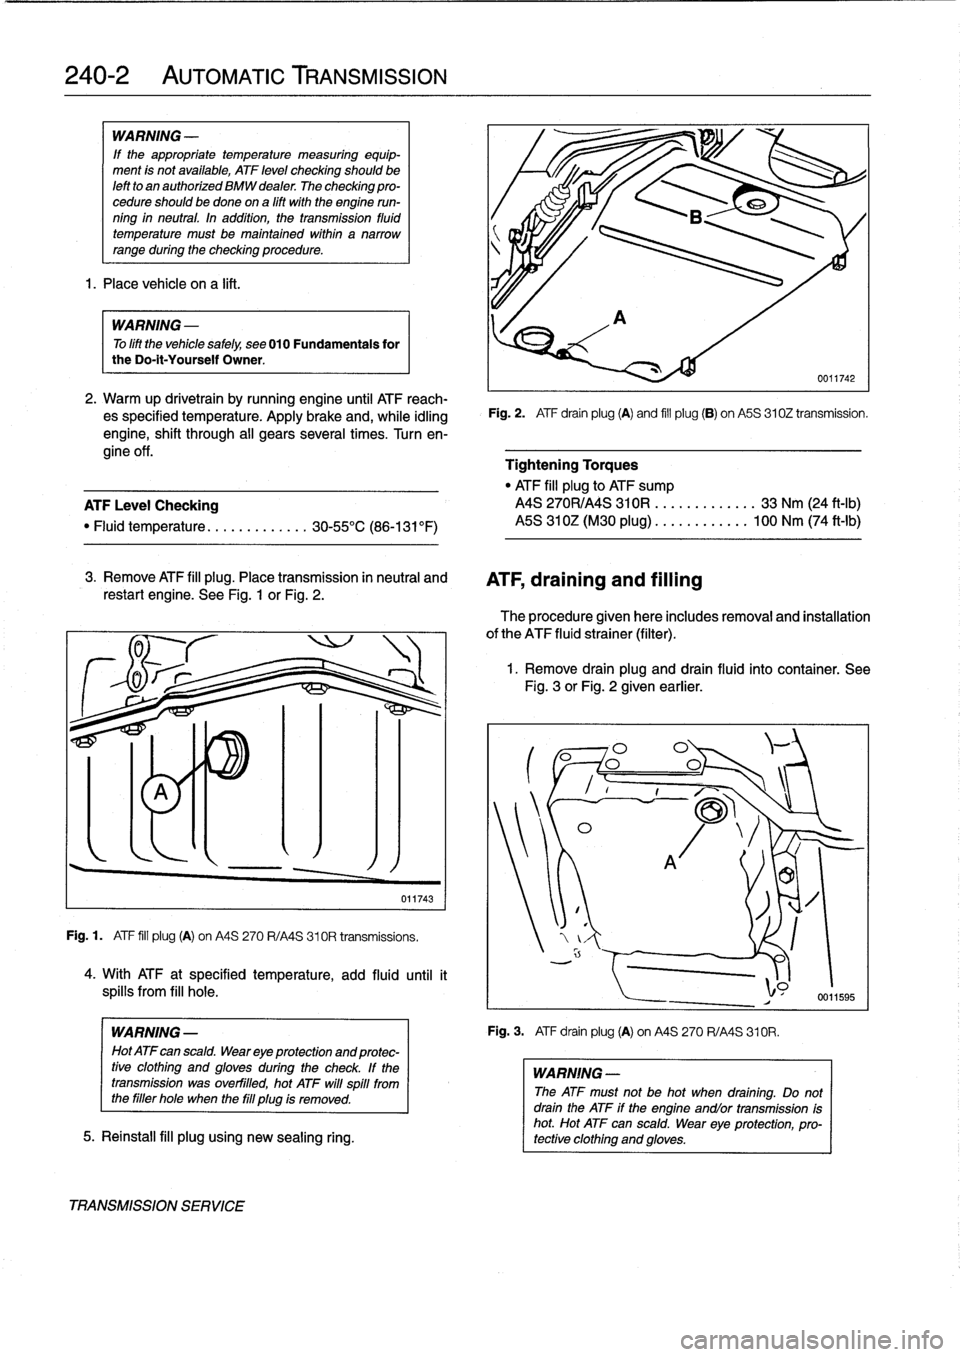 BMW 328i 1997 E36 Owners Manual 
240-2

	

AUTOMATIC
TRANSMISSION

WARNING
-

If
the
appropriate
temperature
measuring
equip-
ment
is
not
available,
ATF
leve¡
checking
shouldbe
left
to
an
authorized
BMW
dealer
The
checking
pro-
ced